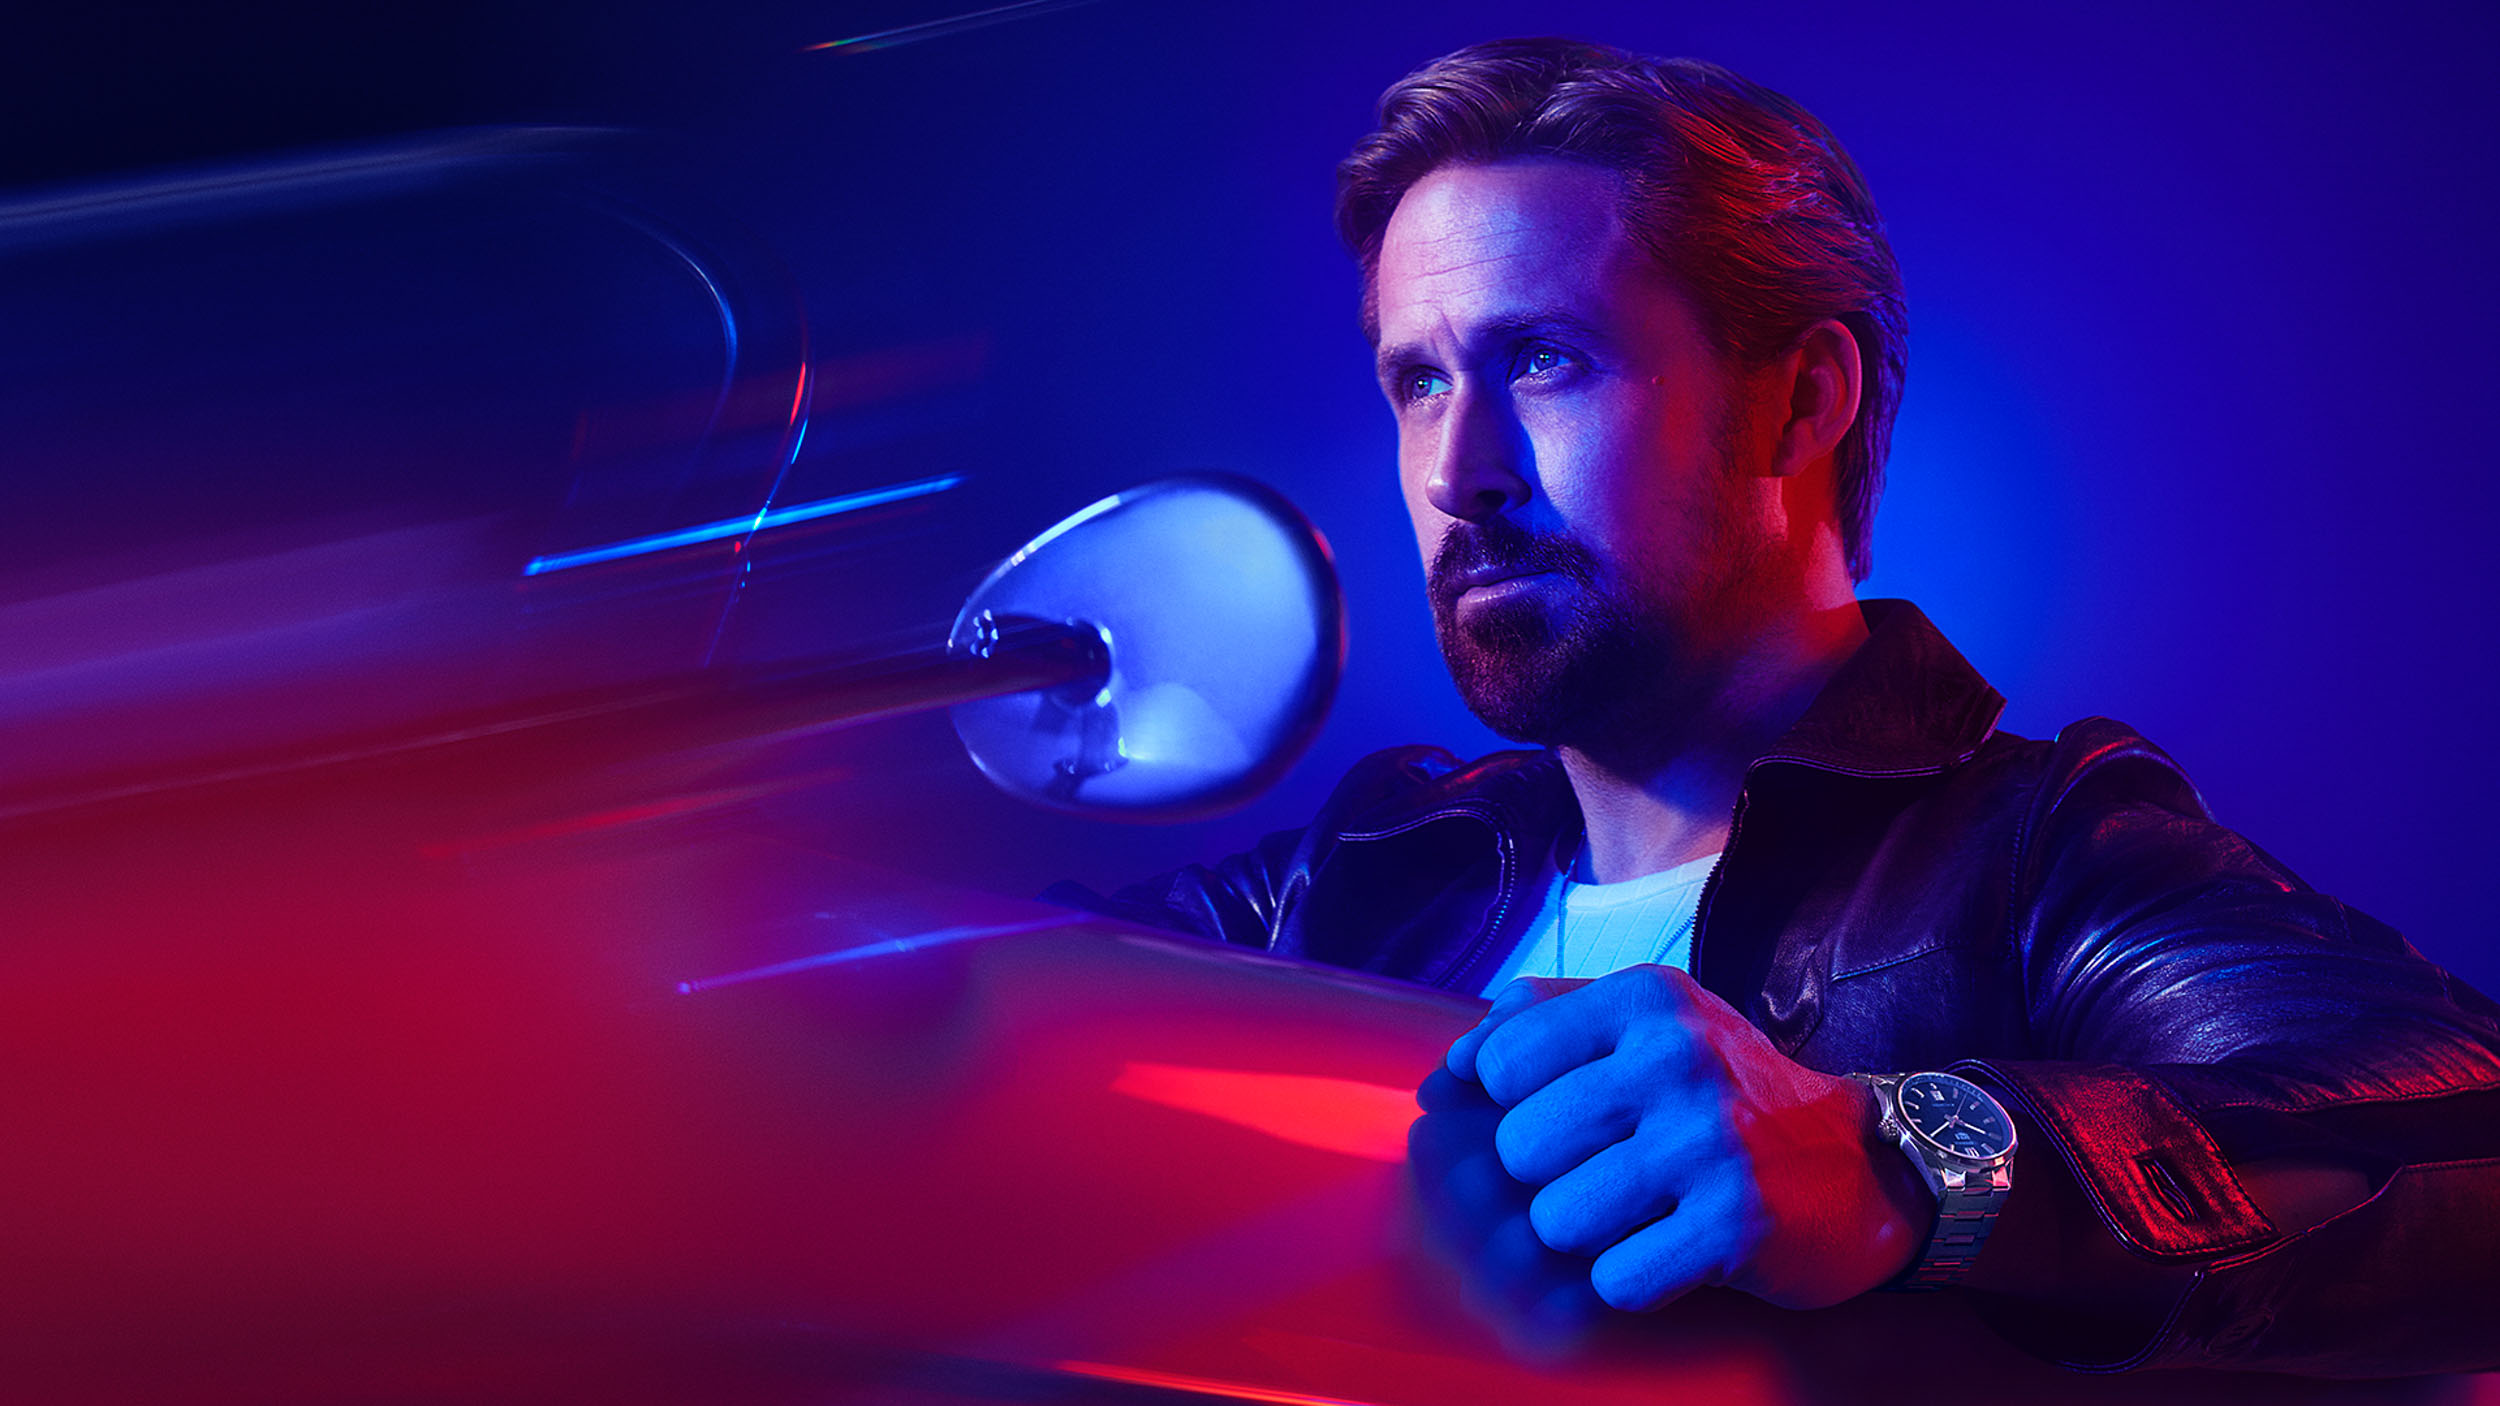 Ryan Gosling featured in the new TAG Heuer campaign by Pari Dukovic